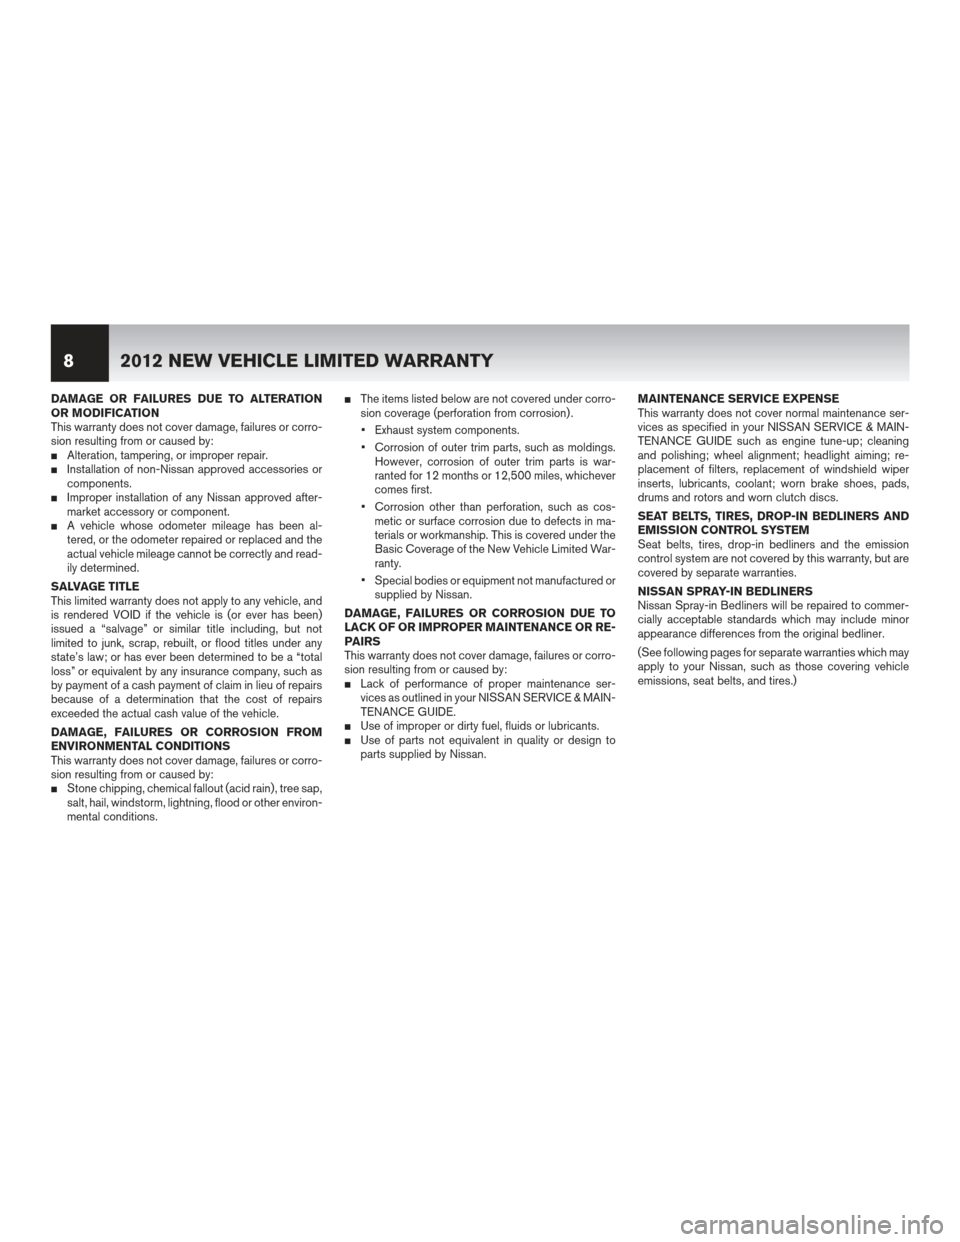 NISSAN VERSA 2012 1.G Warranty Booklet DAMAGE OR FAILURES DUE TO ALTERATION
OR MODIFICATION
This warranty does not cover damage, failures or corro-
sion resulting from or caused by:
Alteration, tampering, or improper repair.Installation 